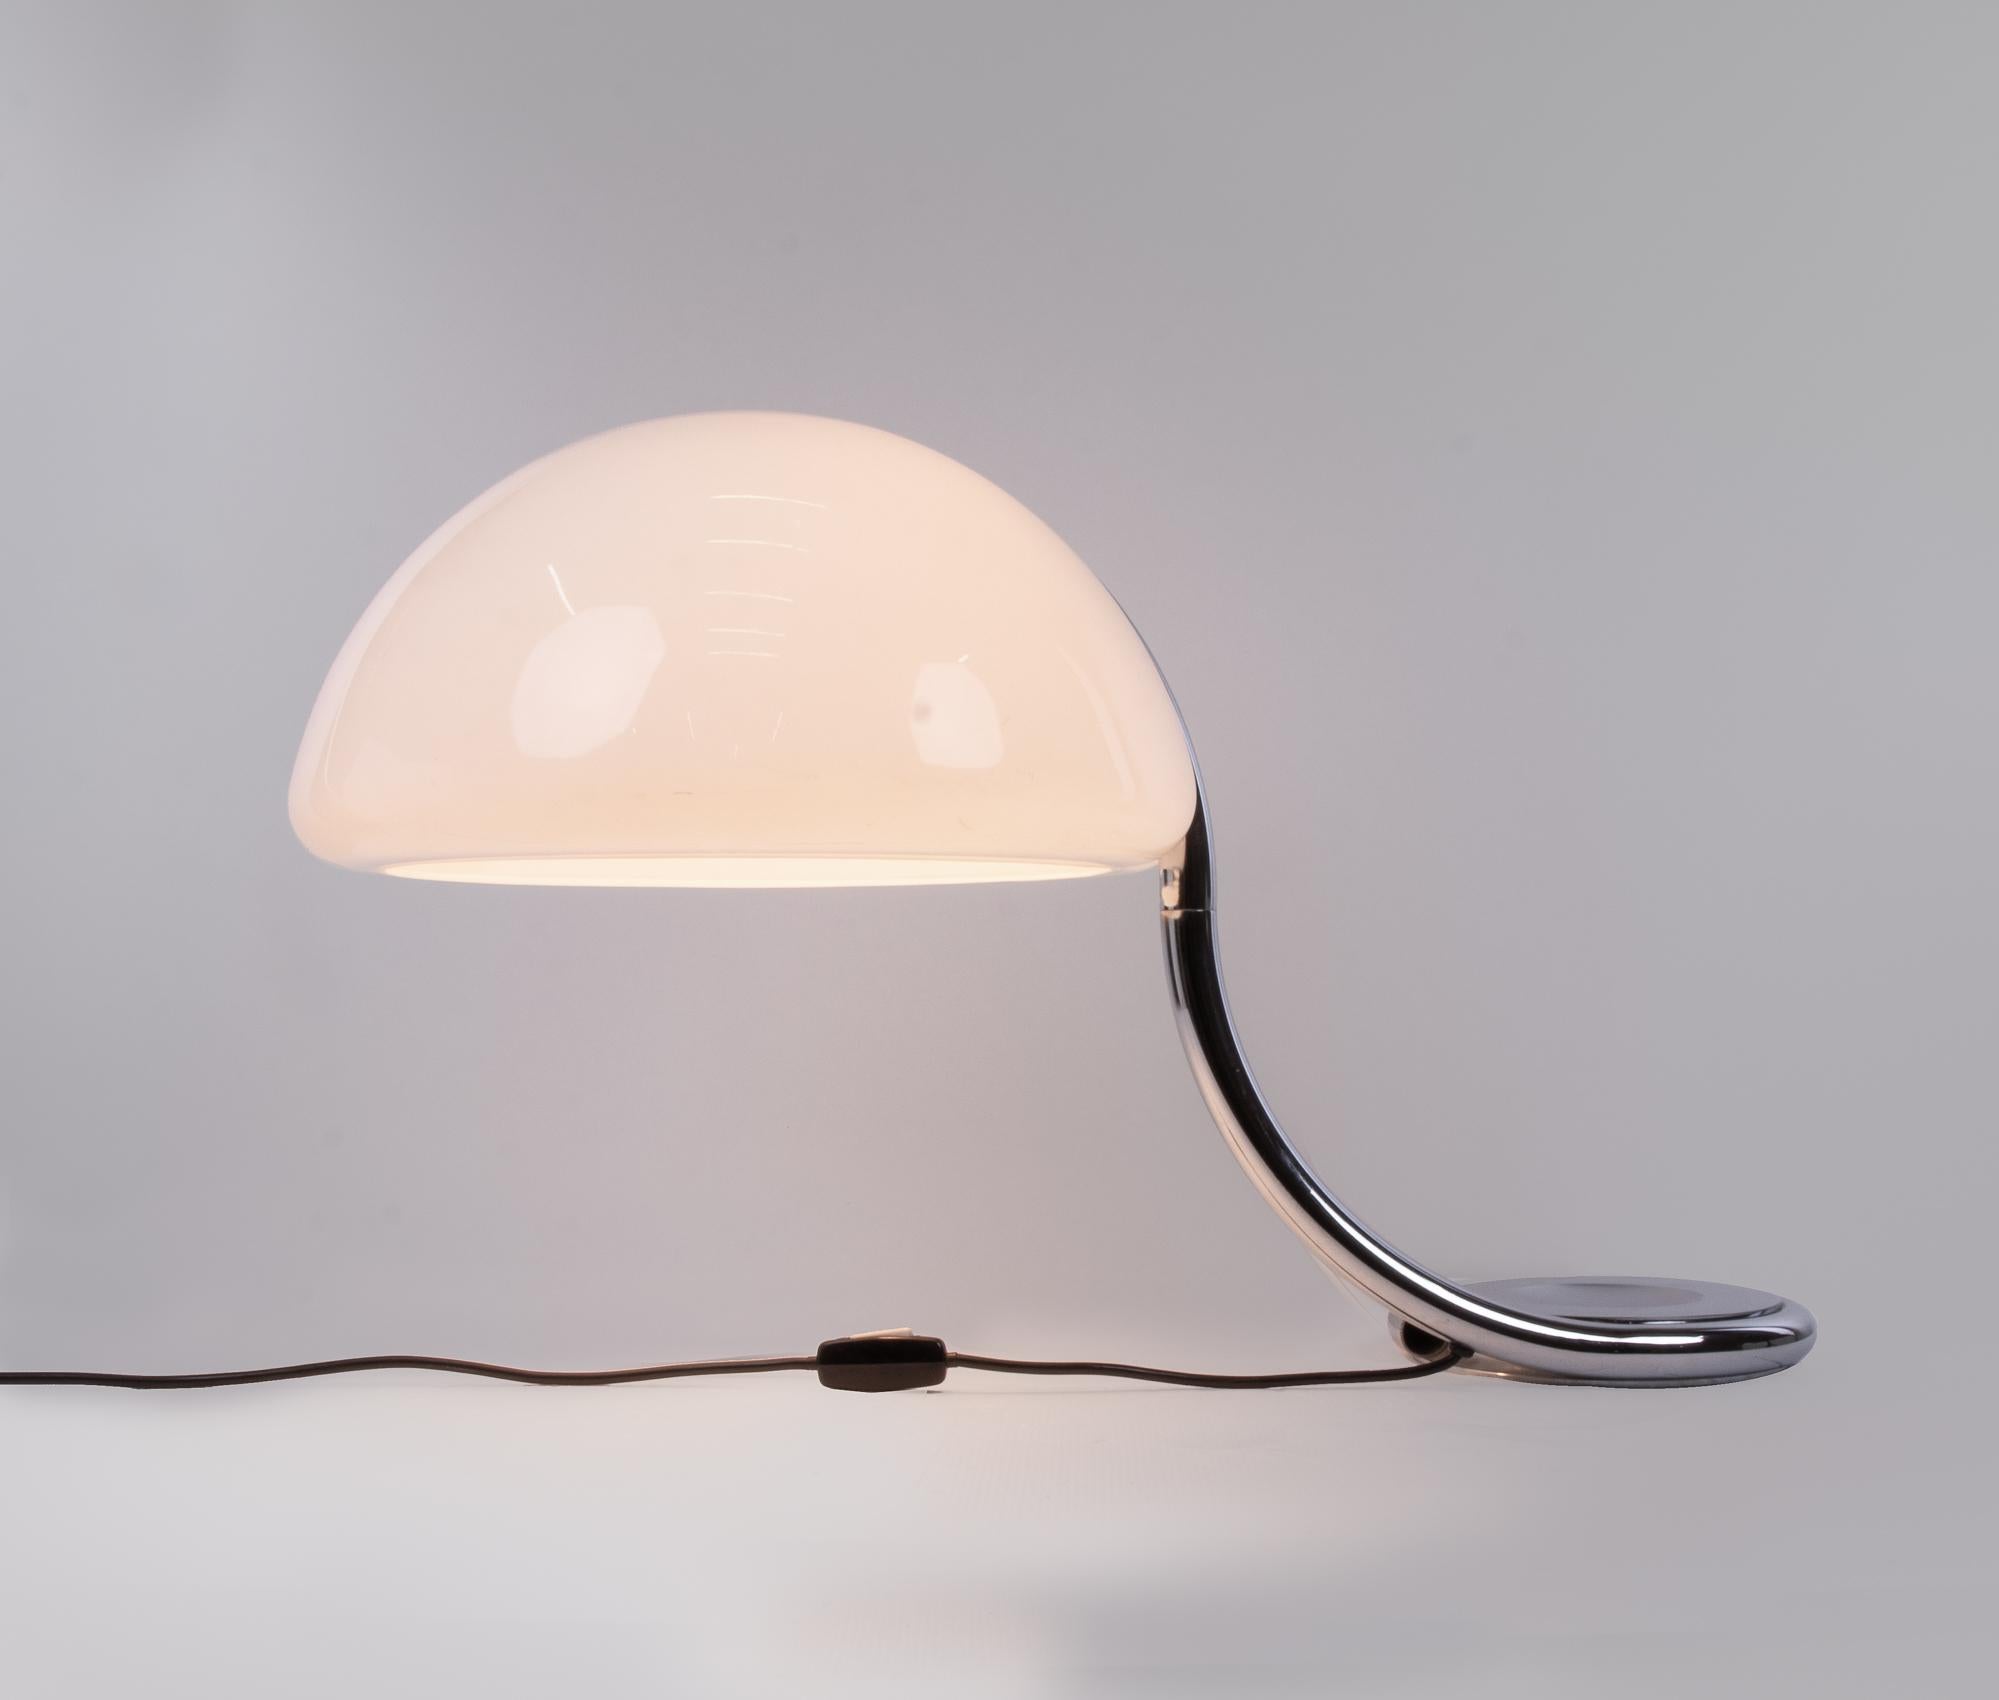 Serpente table lamp designed by Elio Martinelli 1965. The diffuser is made of white opal plastic, the swiveling arm and base are made of chromed steel. The lamp is heavy, solid and rotatable. 

Unique and iconic Italian design of 20th century design